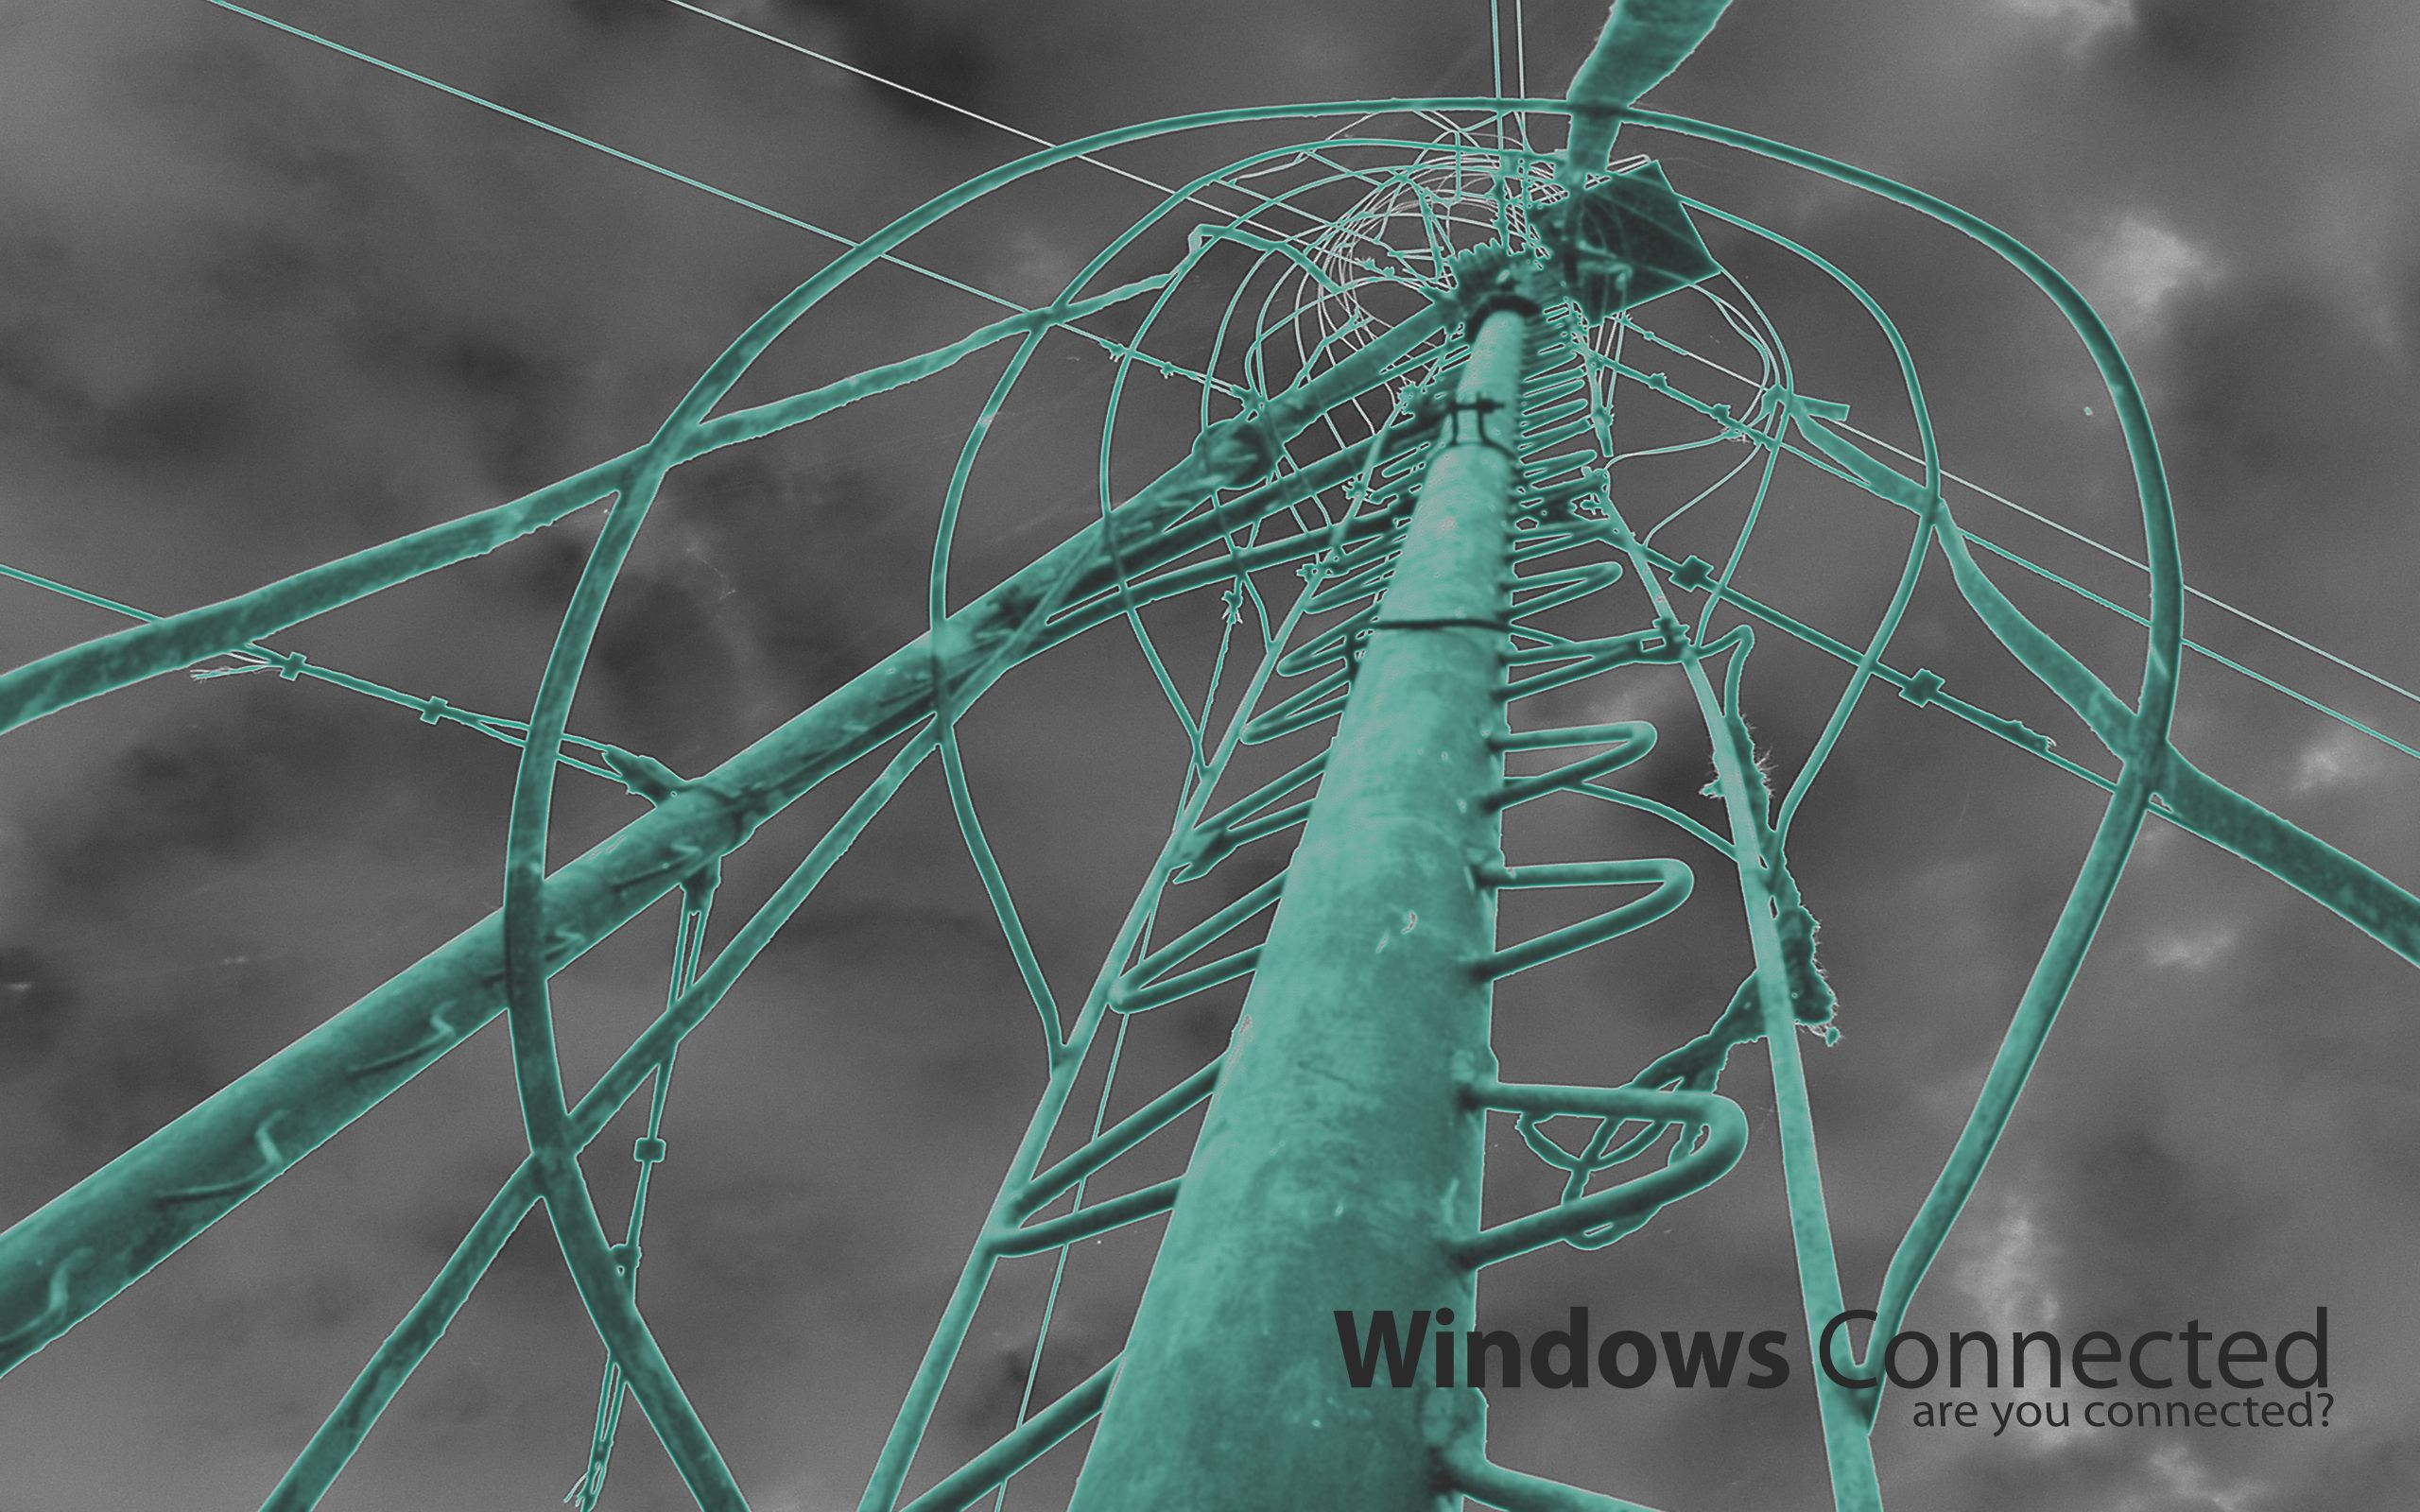 Windows Connected wallpaper. Windows Connected